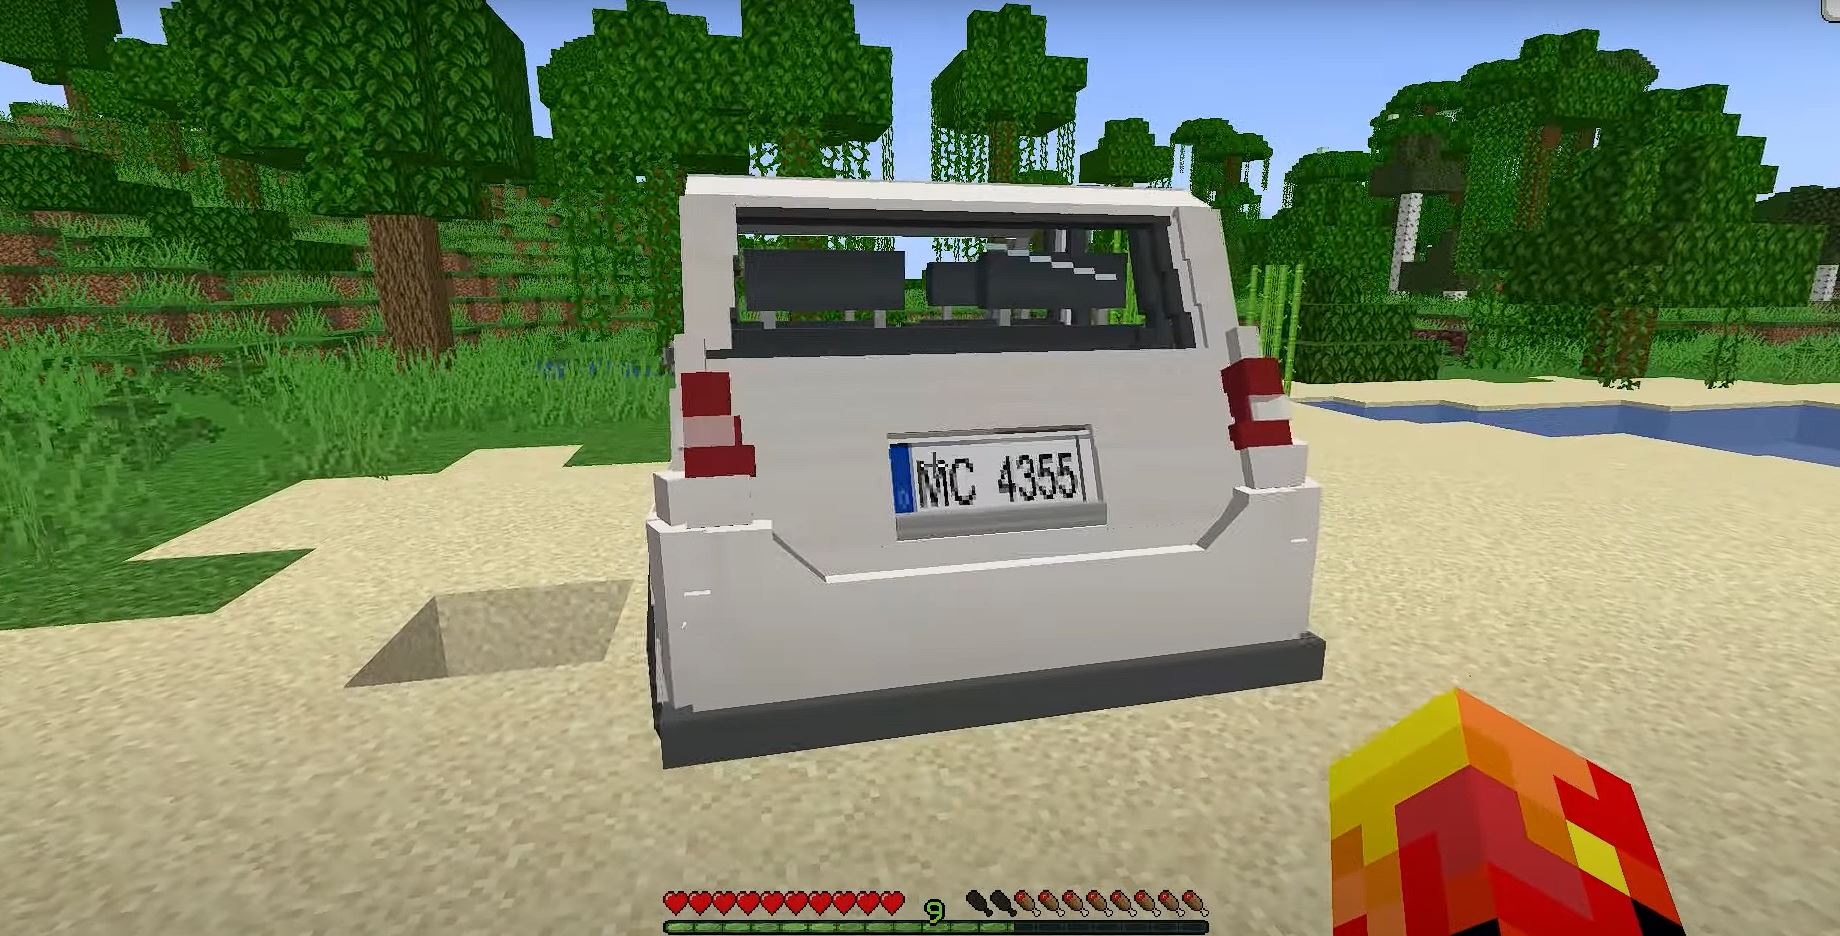 Minecraft Realistic Car Mod 1.19 Adds New Vehicles, Bio-Diesel, and New